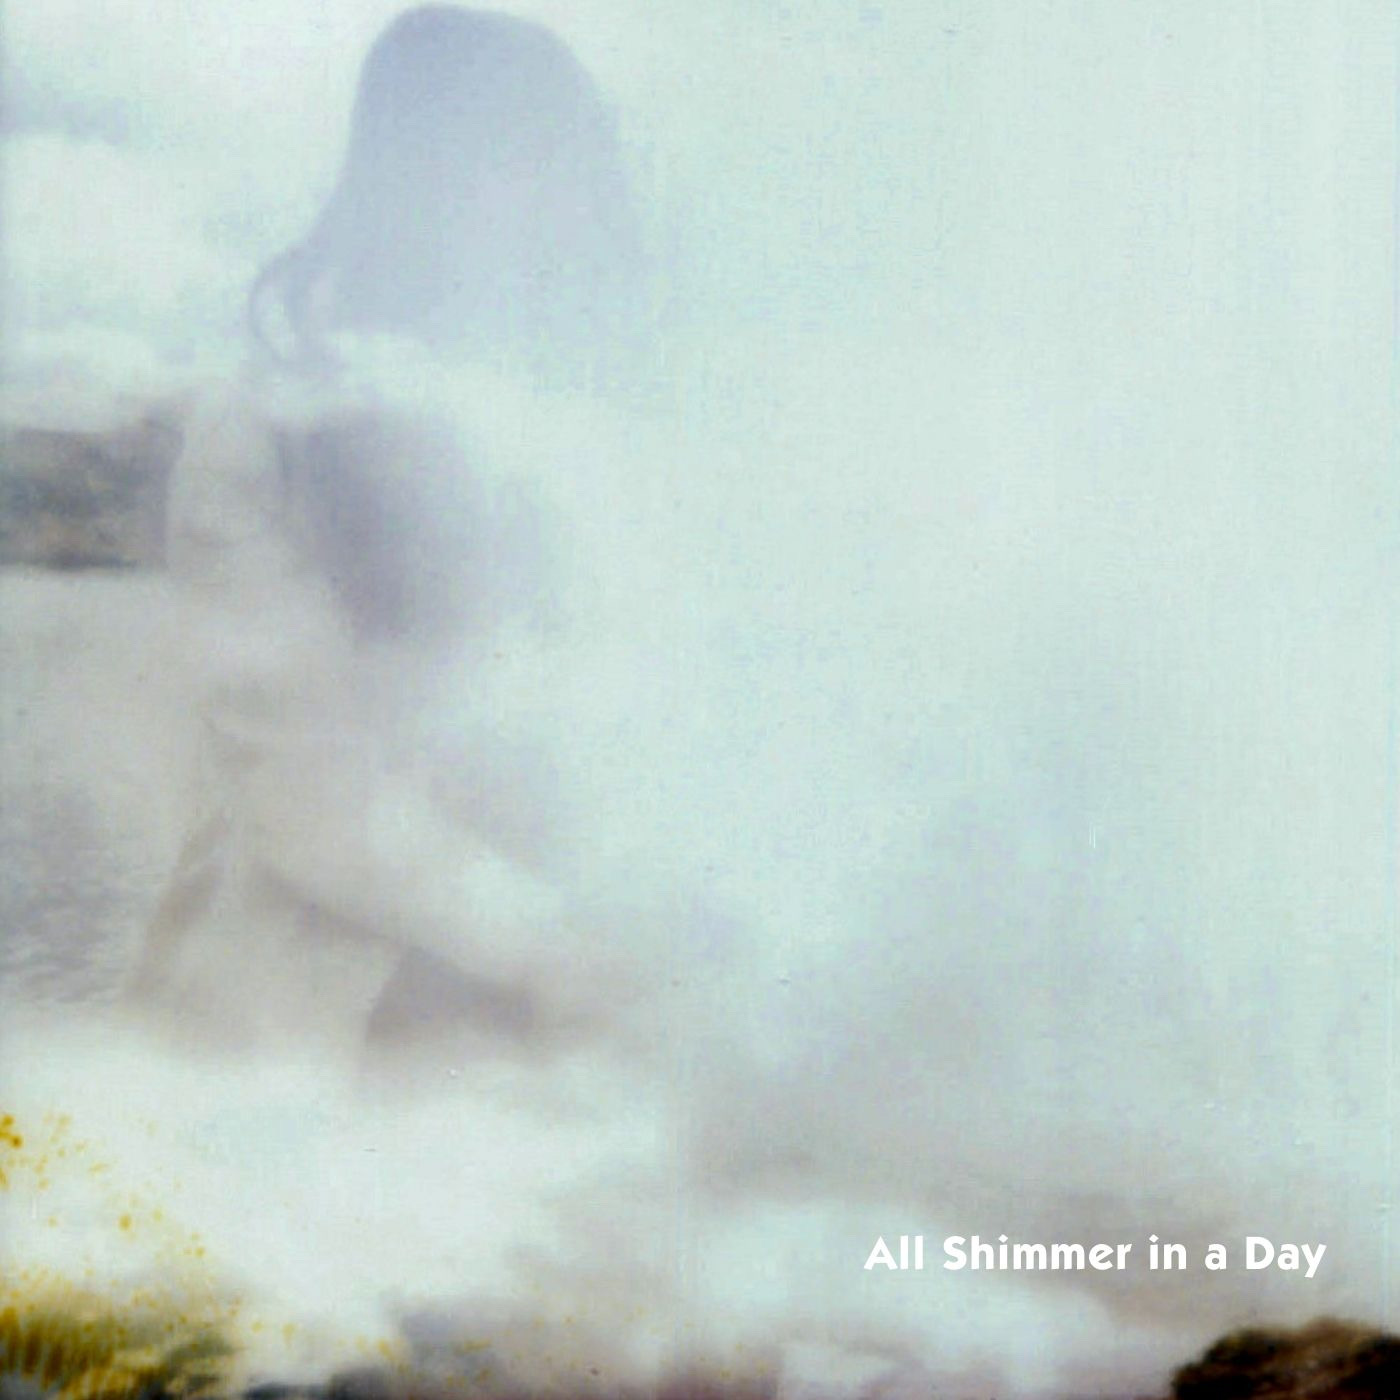 My Lucky Day release “ All Shimmer in a Day”